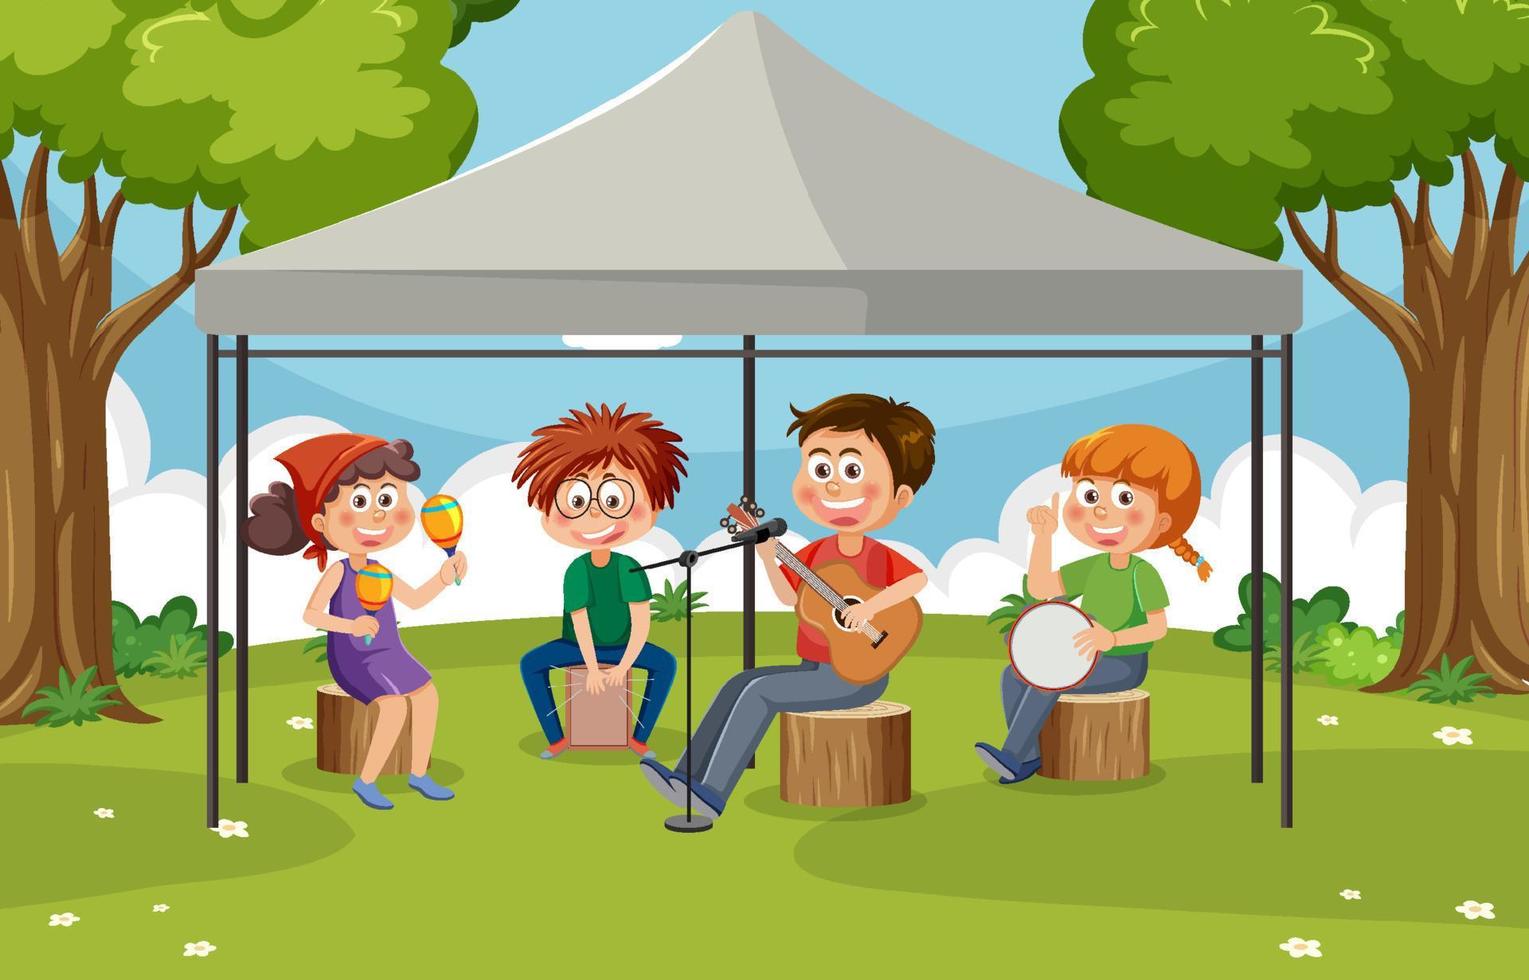 Children playing music in the park vector